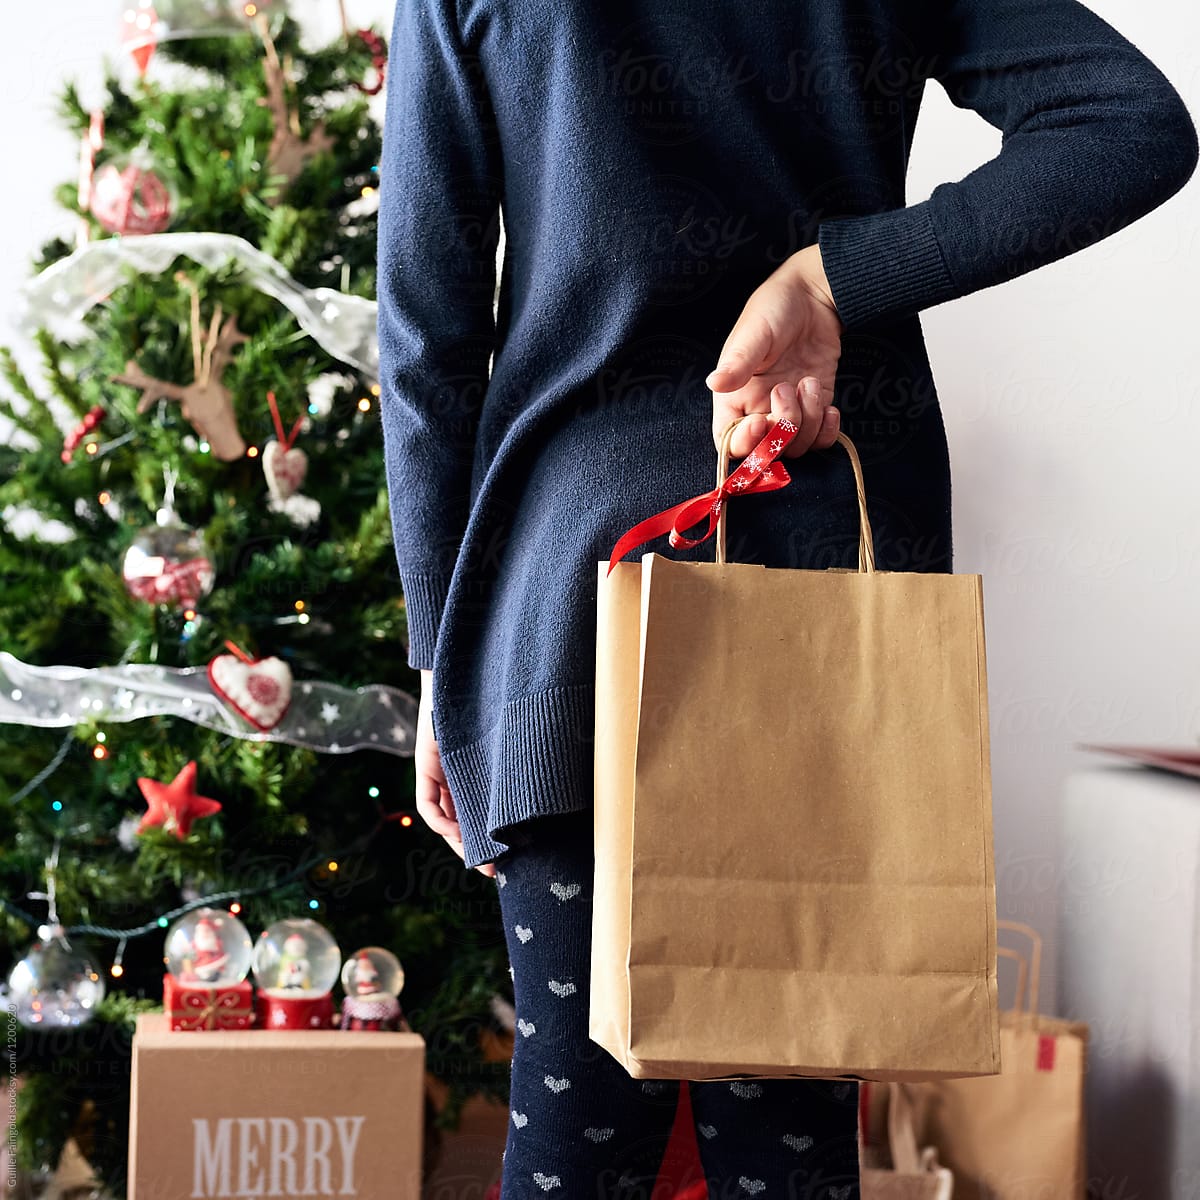 Kid holding present in paper bag Christmas tree.